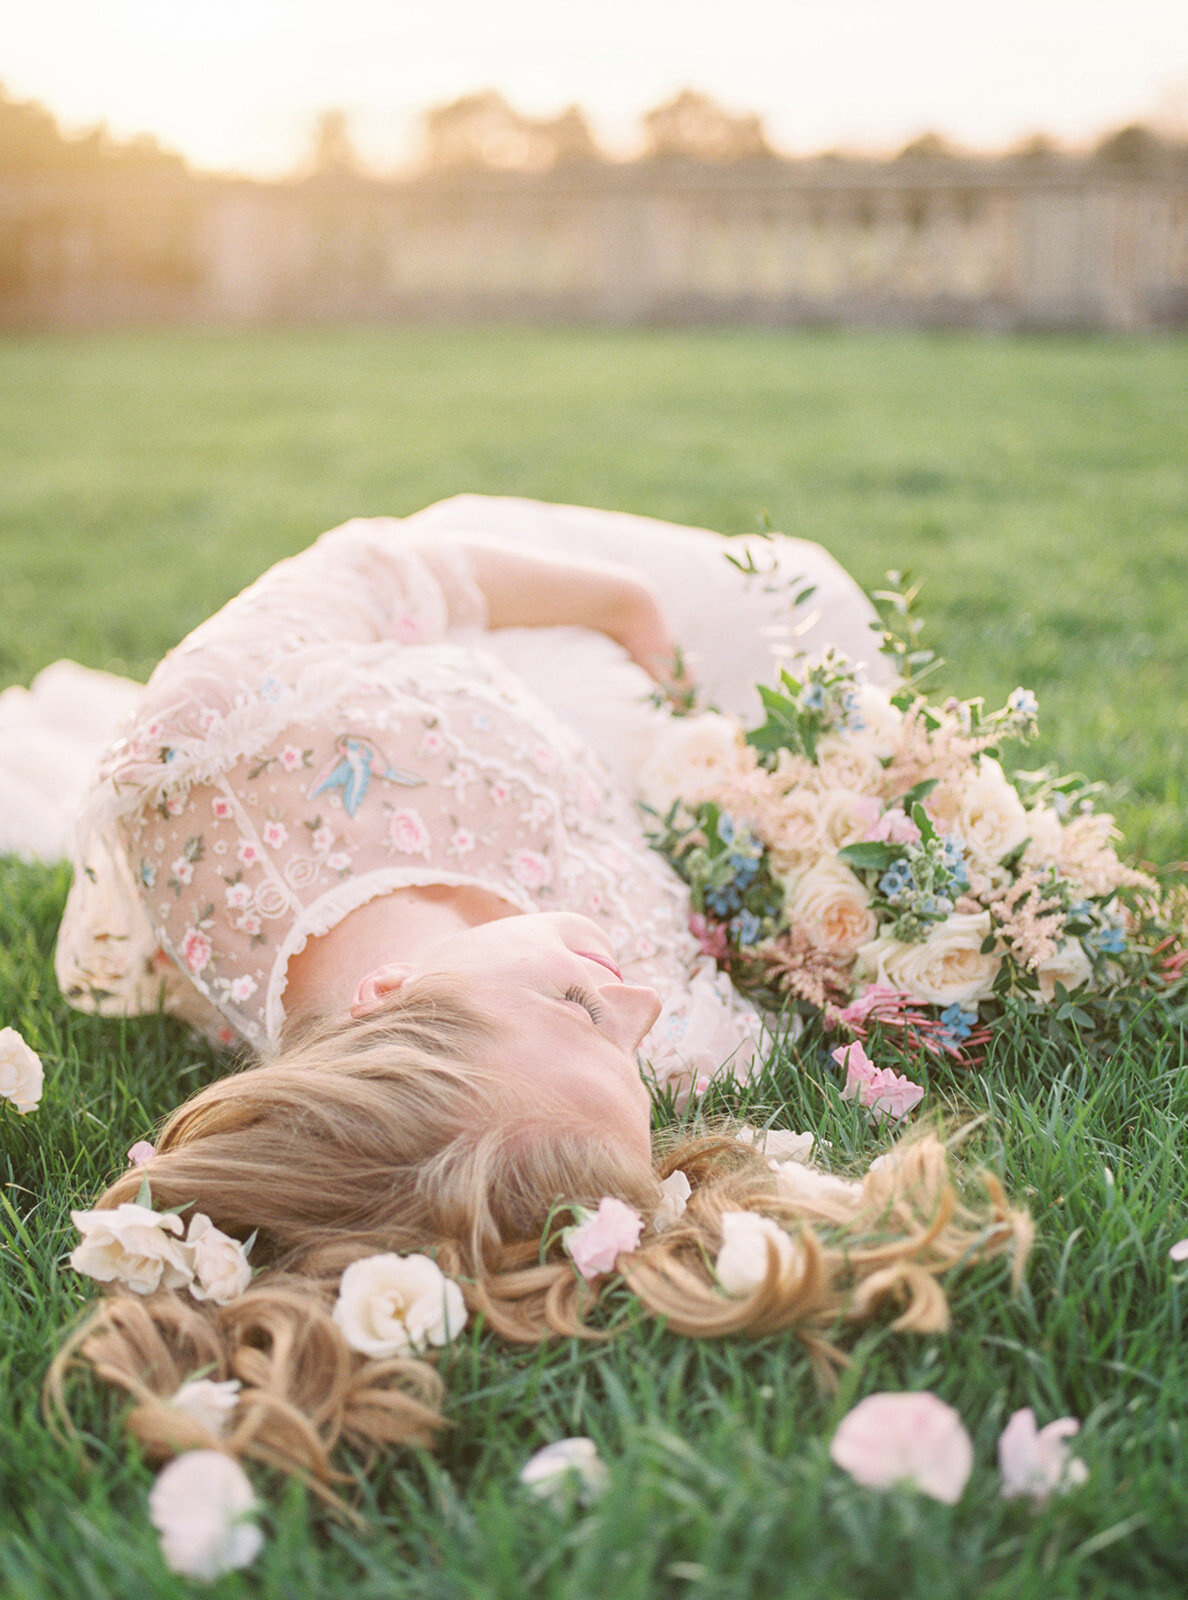 Blonde mother lays in grass with flowers in her hair.